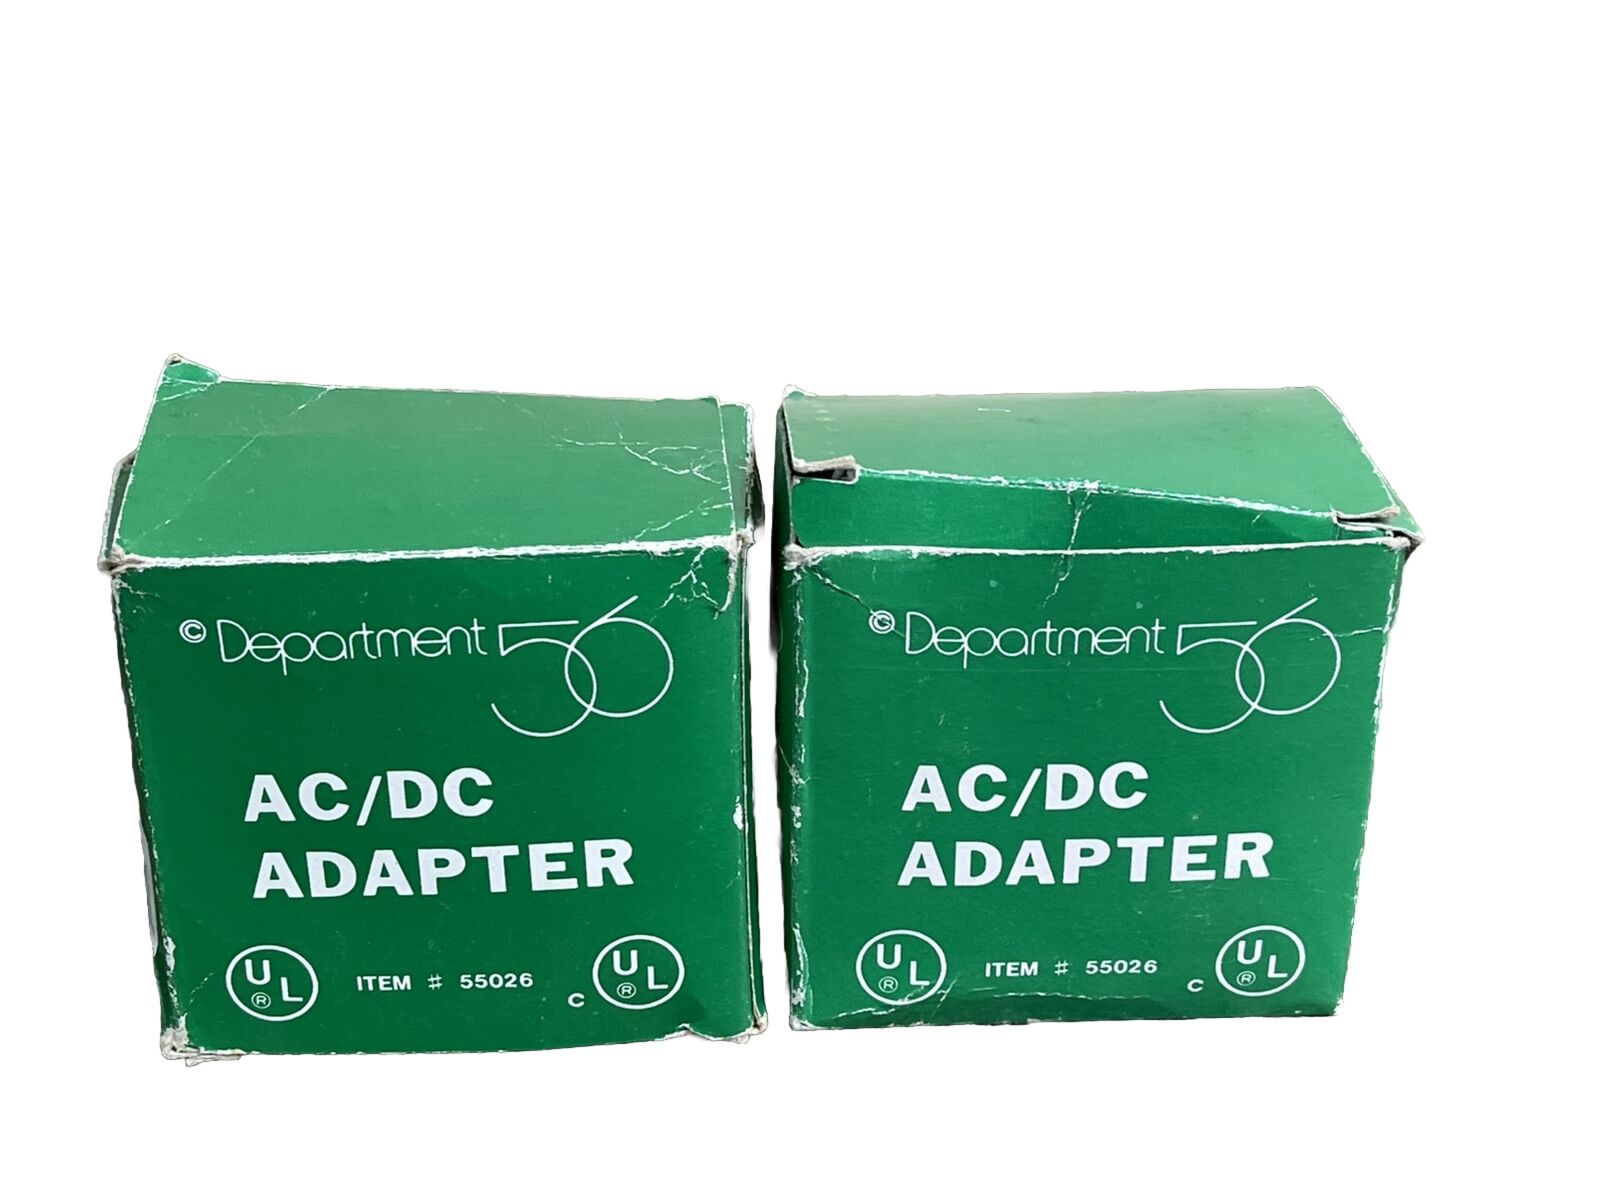 LOT OF 2 Department 56 AC/DC Adapter - White - Brand New